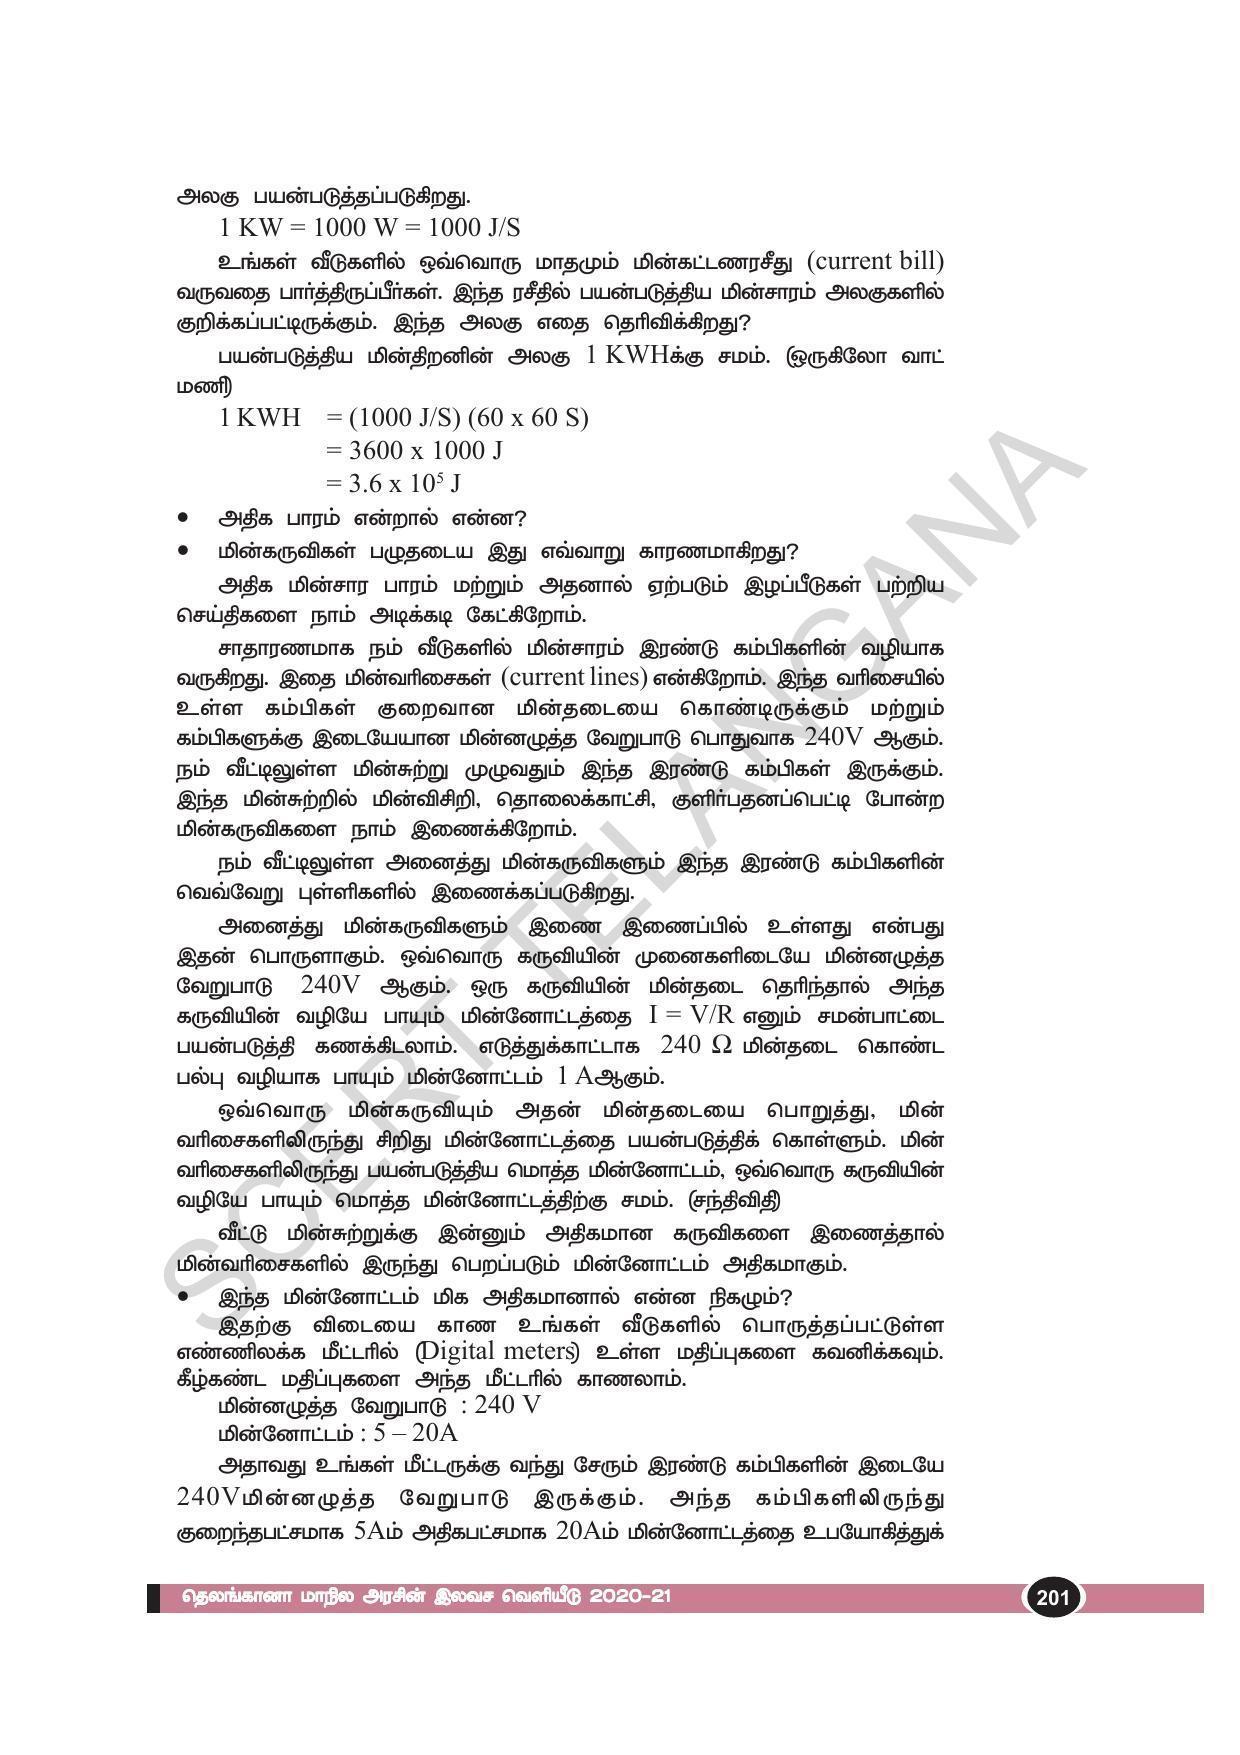 TS SCERT Class 10 Physical Science(Tamil Medium) Text Book - Page 213